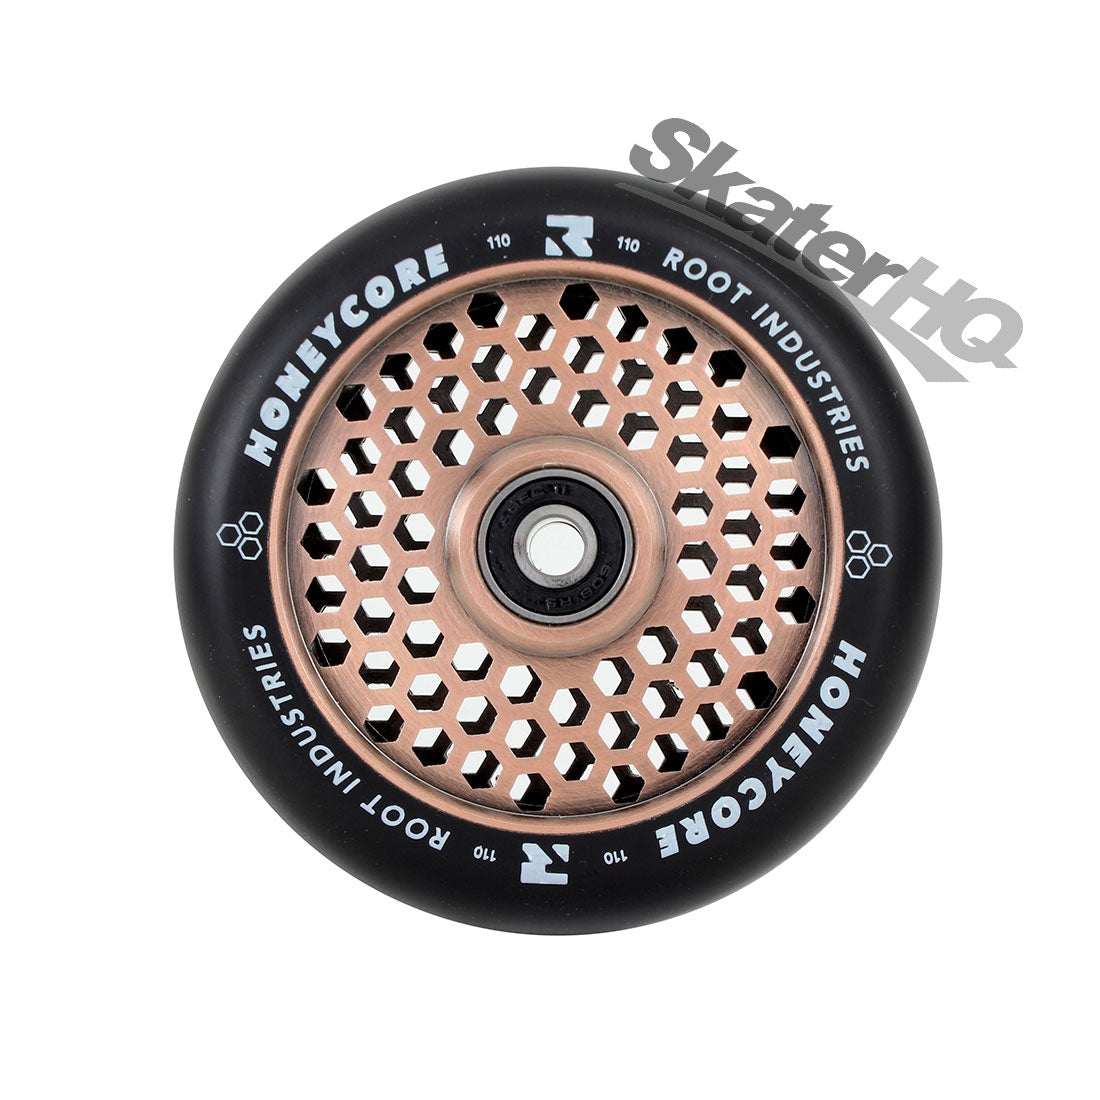 Root Industries Honey Core 110mm - Black/Coppertone Scooter Wheels